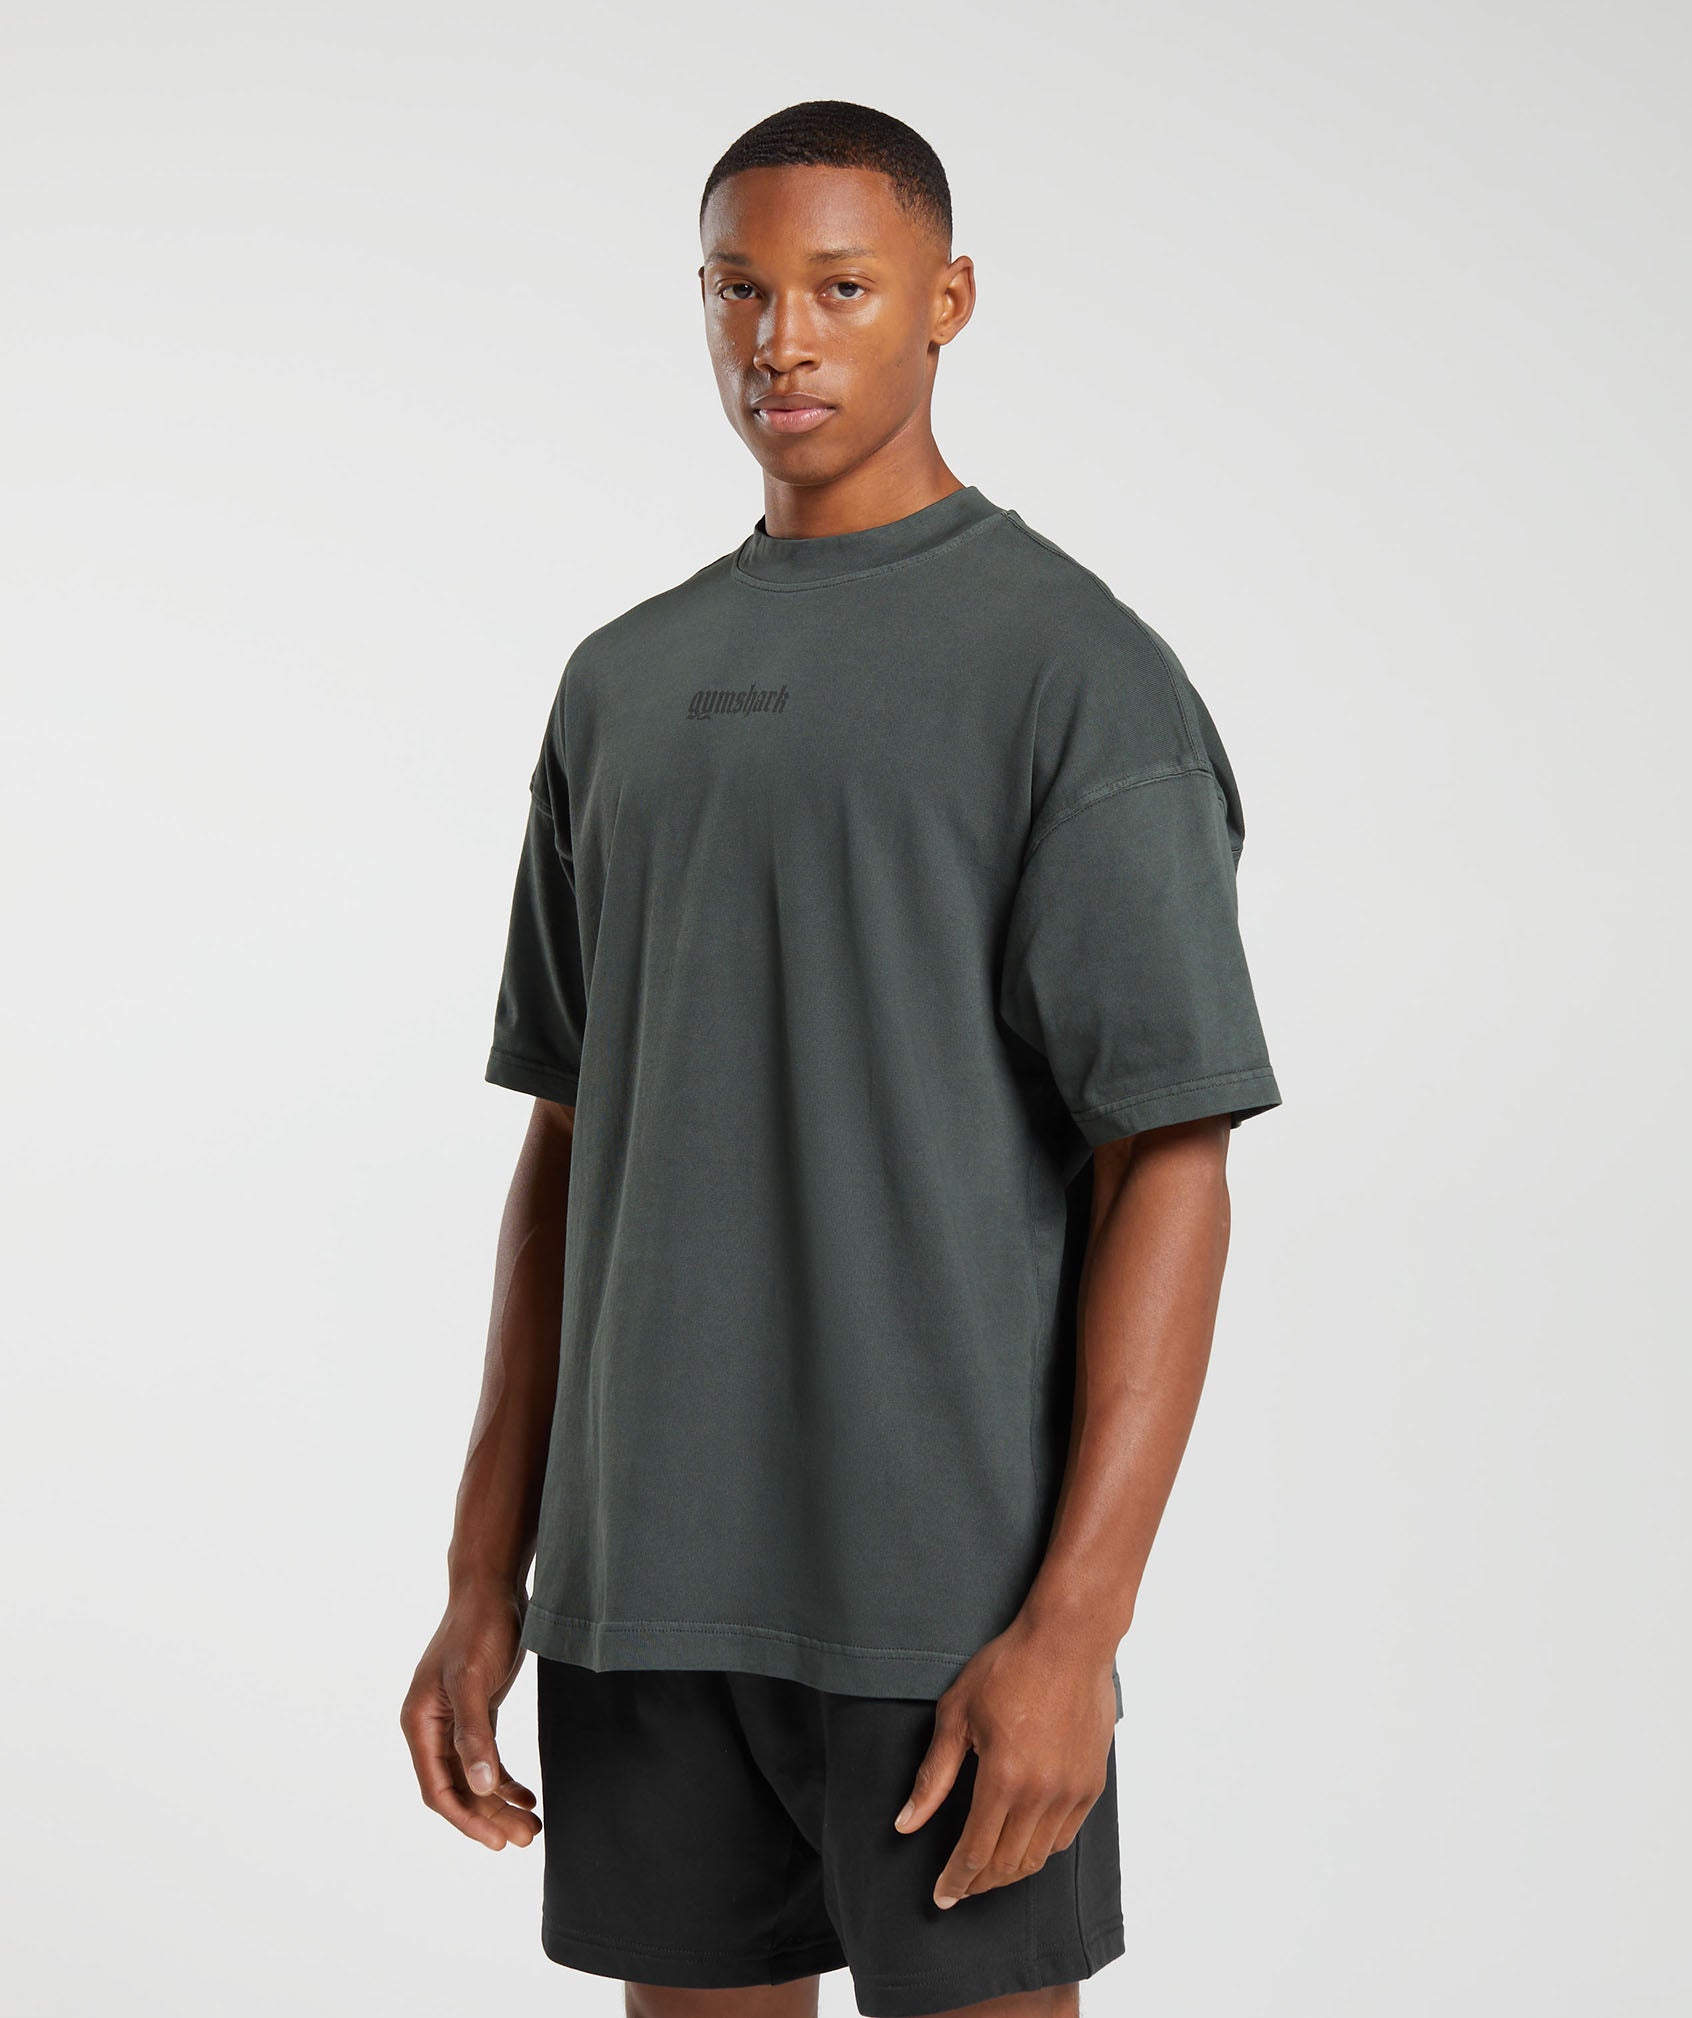 Heavyweight T-Shirt in Deep Olive Green - view 3